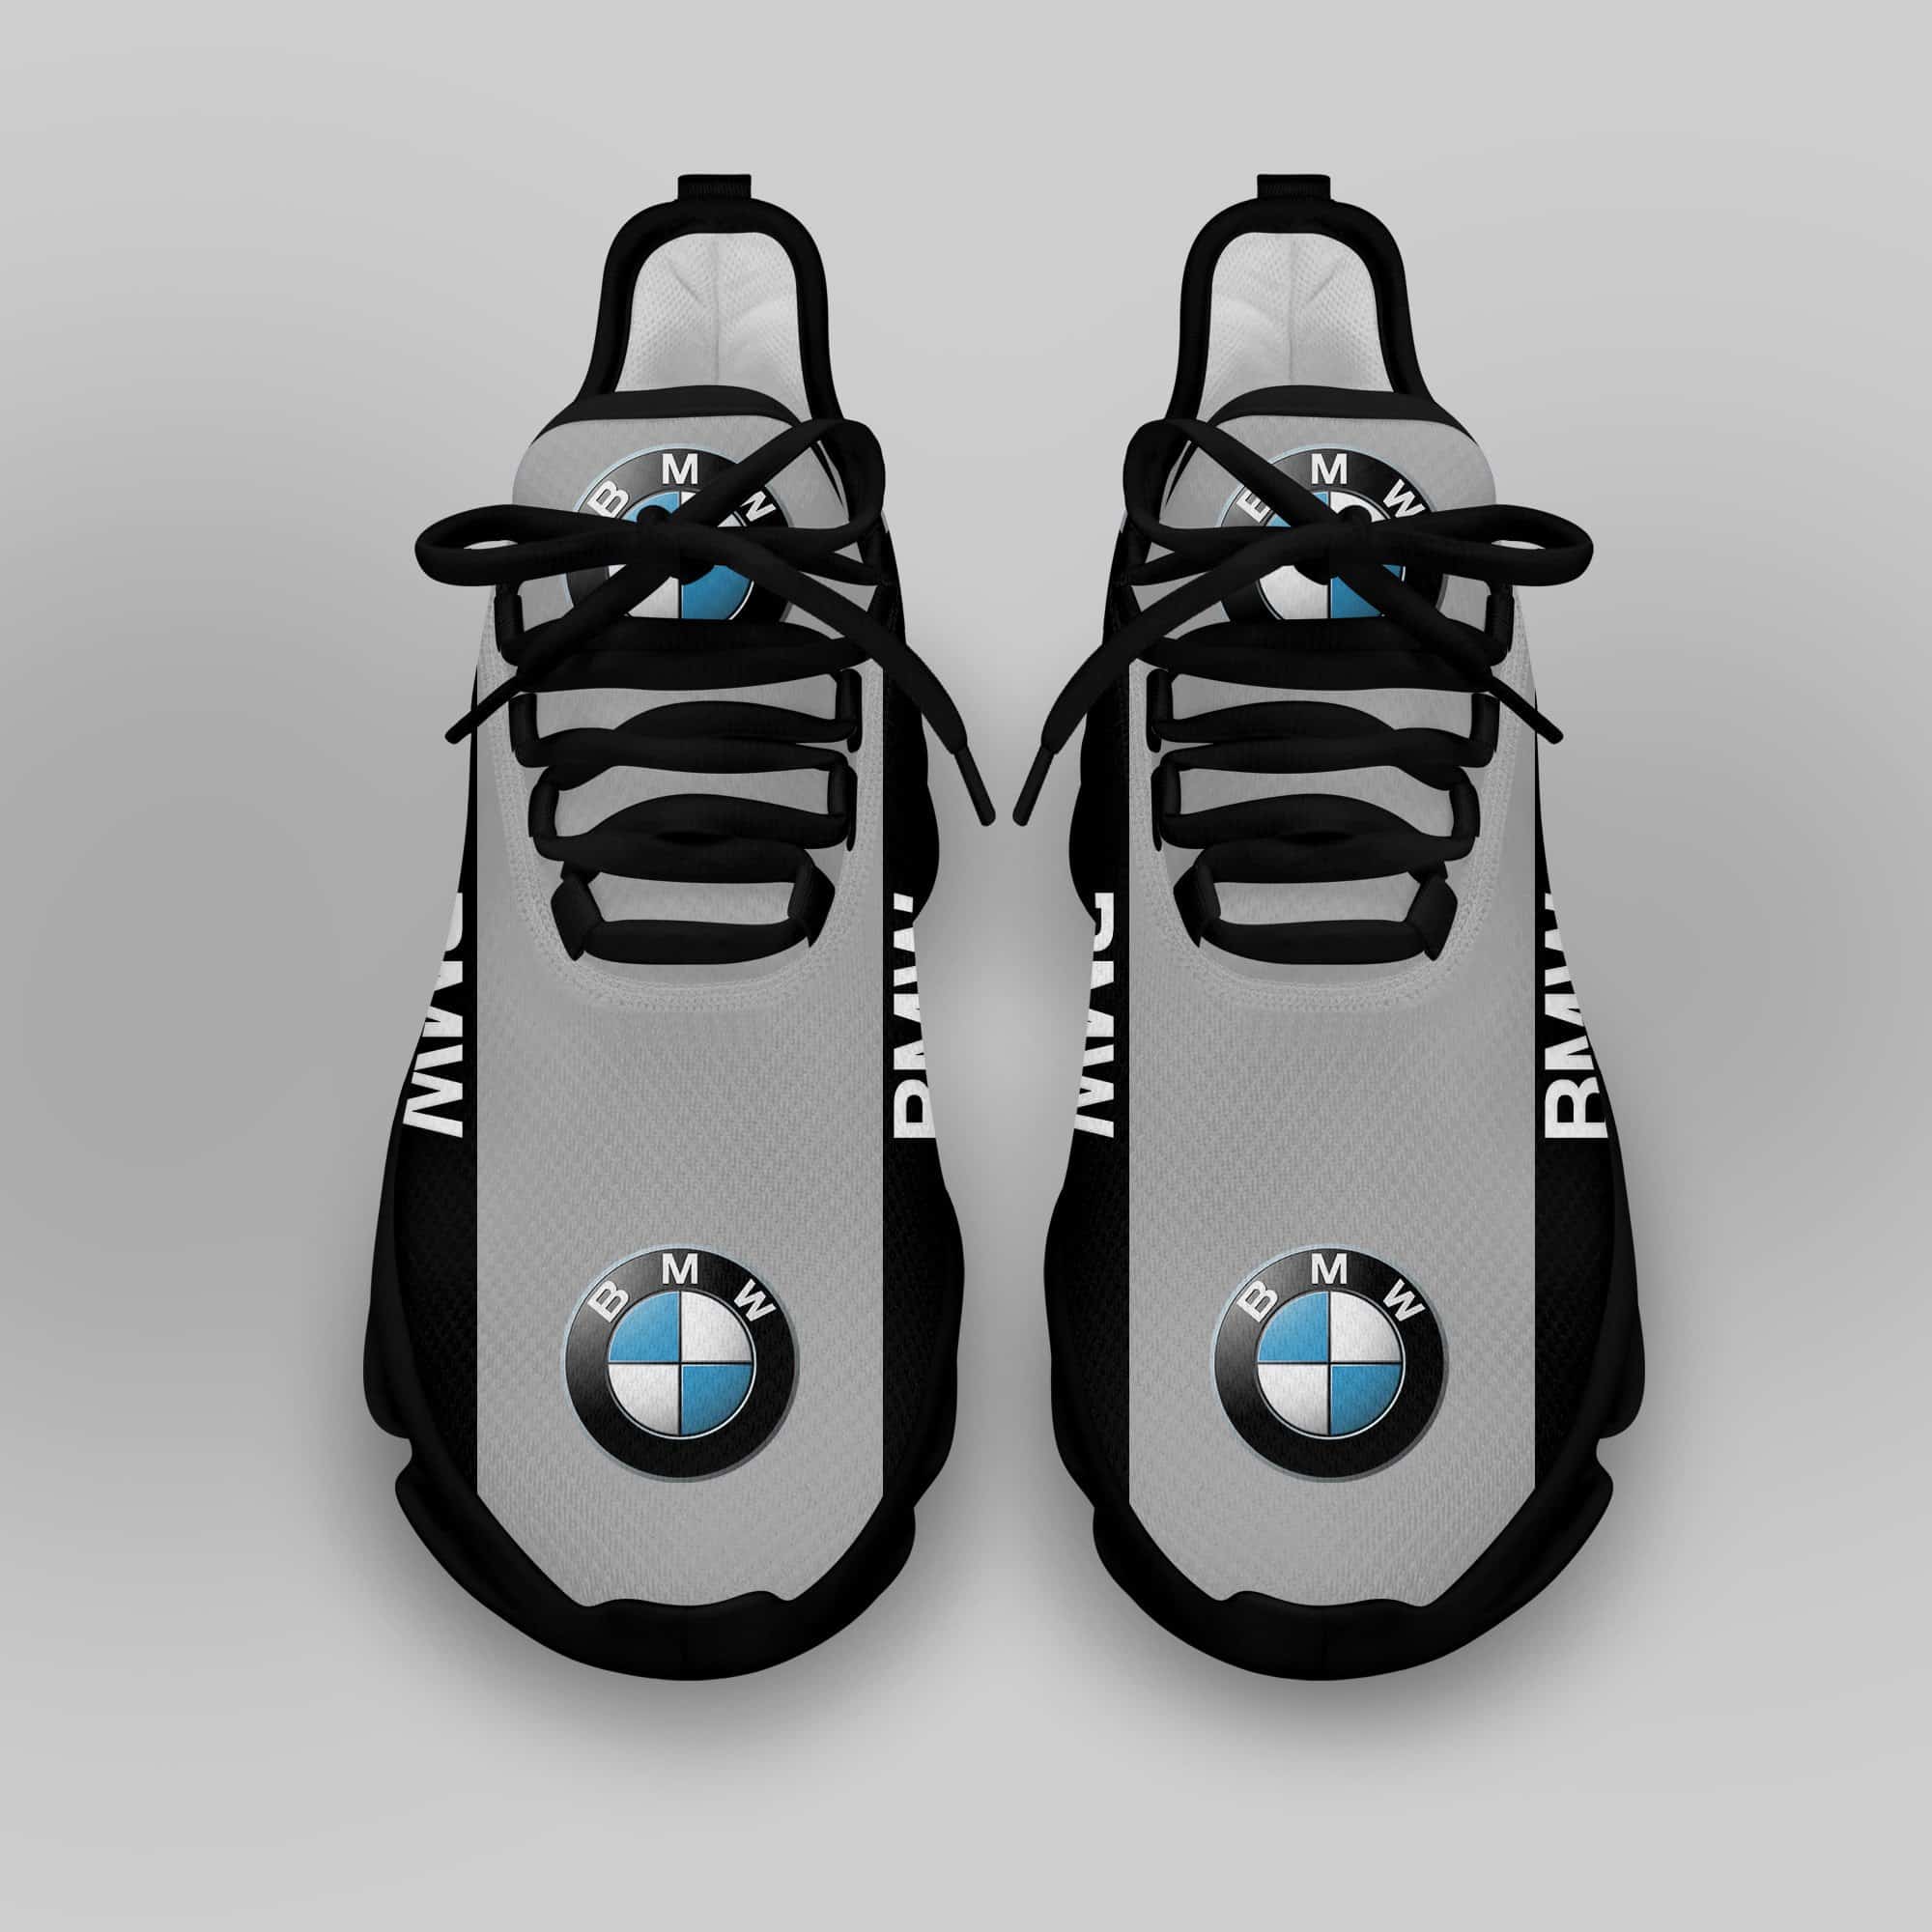 Bmw Running Shoes Max Soul Shoes Sneakers Ver 21 4